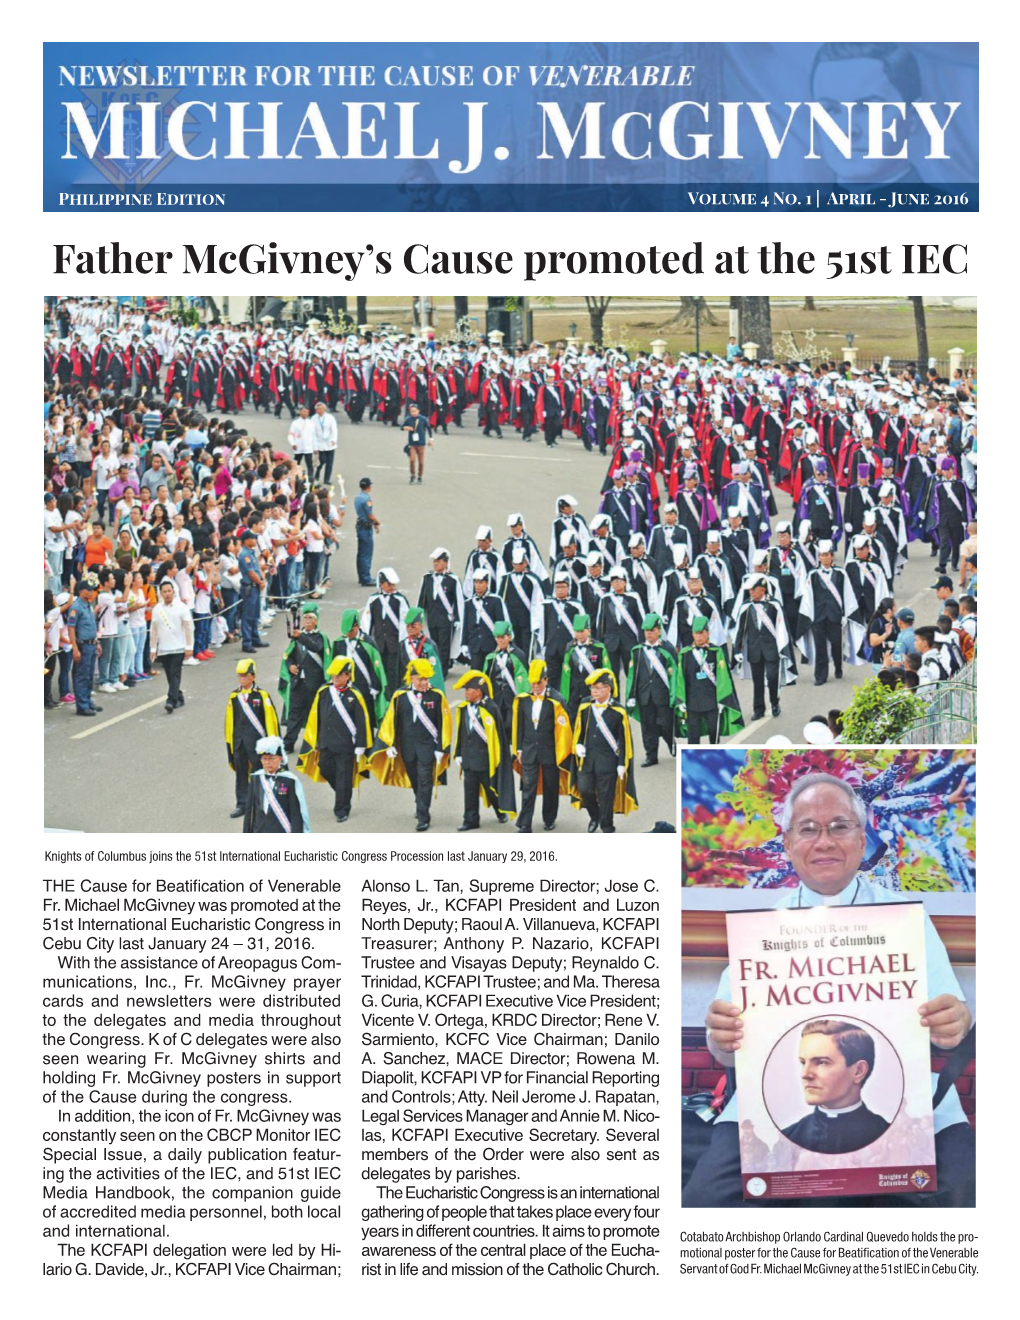 Father Mcgivney's Cause Promoted at the 51St